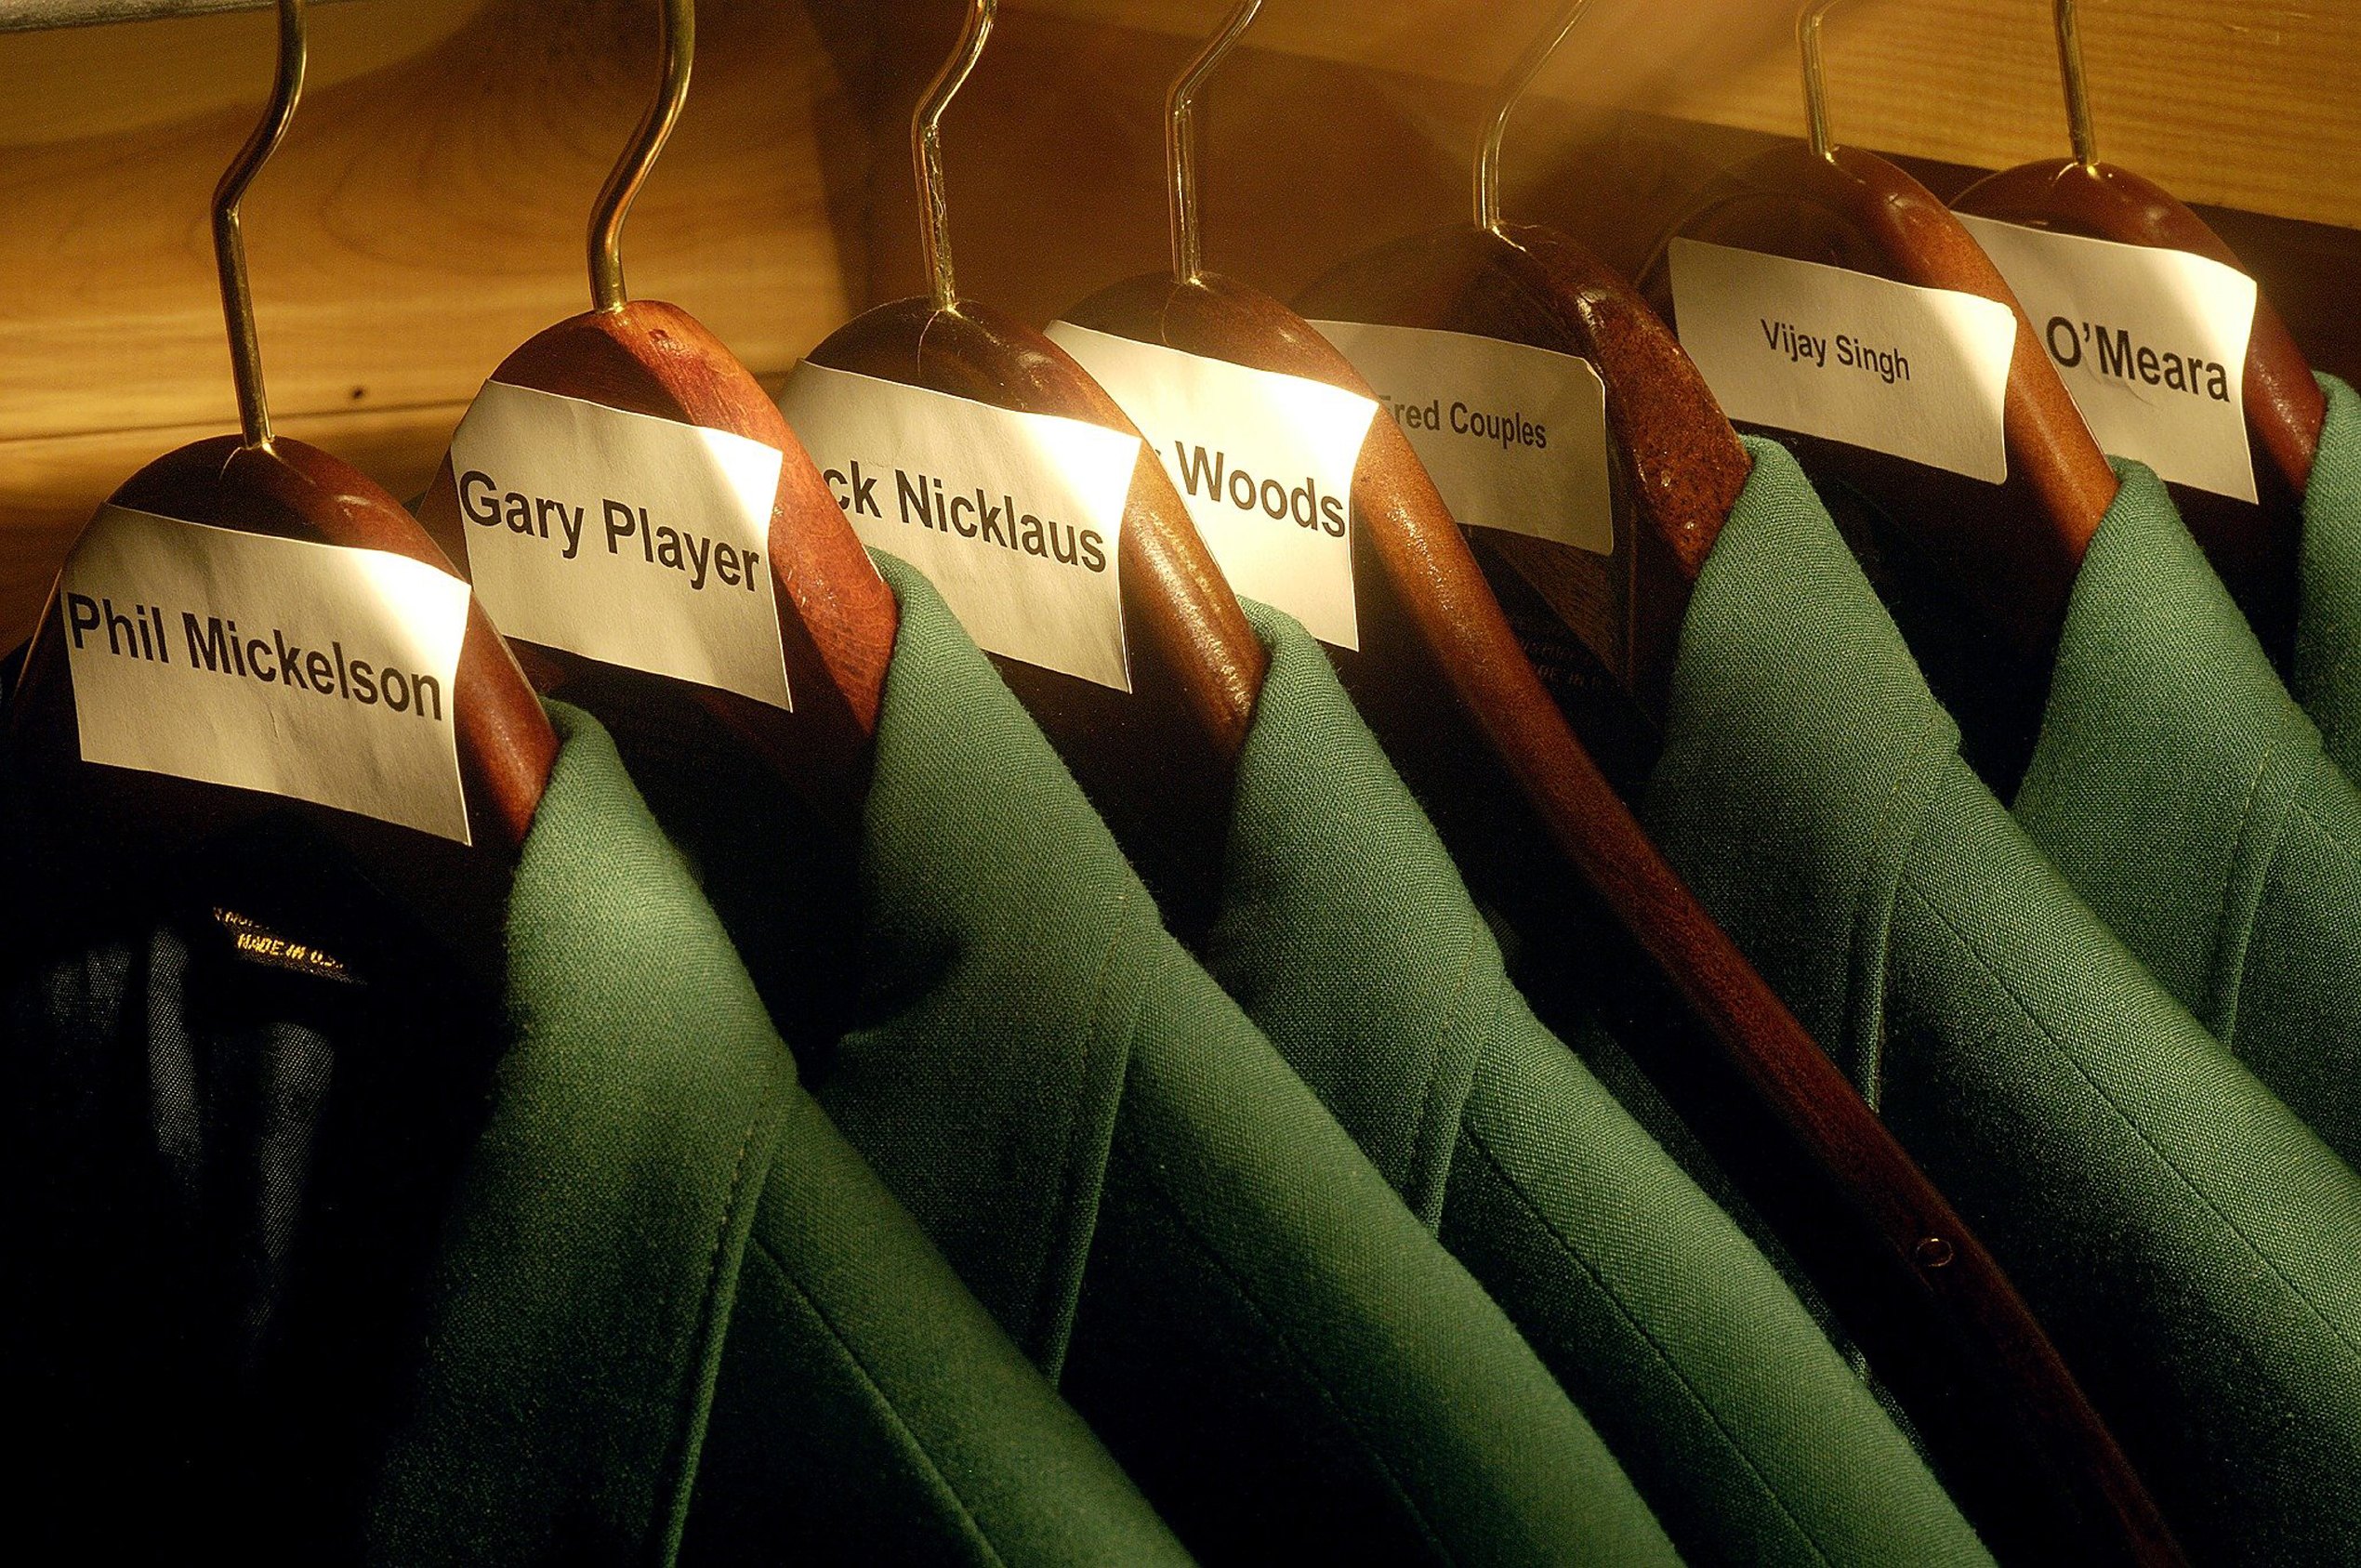 Golf: View of green blazers, jackets of past Masters champions in clubhouse of Augusta National. Augusta, GA 2/21/2006 CREDIT: Fred Vuich (Photo by Fred Vuich /Sports Illustrated via Getty Images) (Set Number: X75269 TK1 R2 F0 )